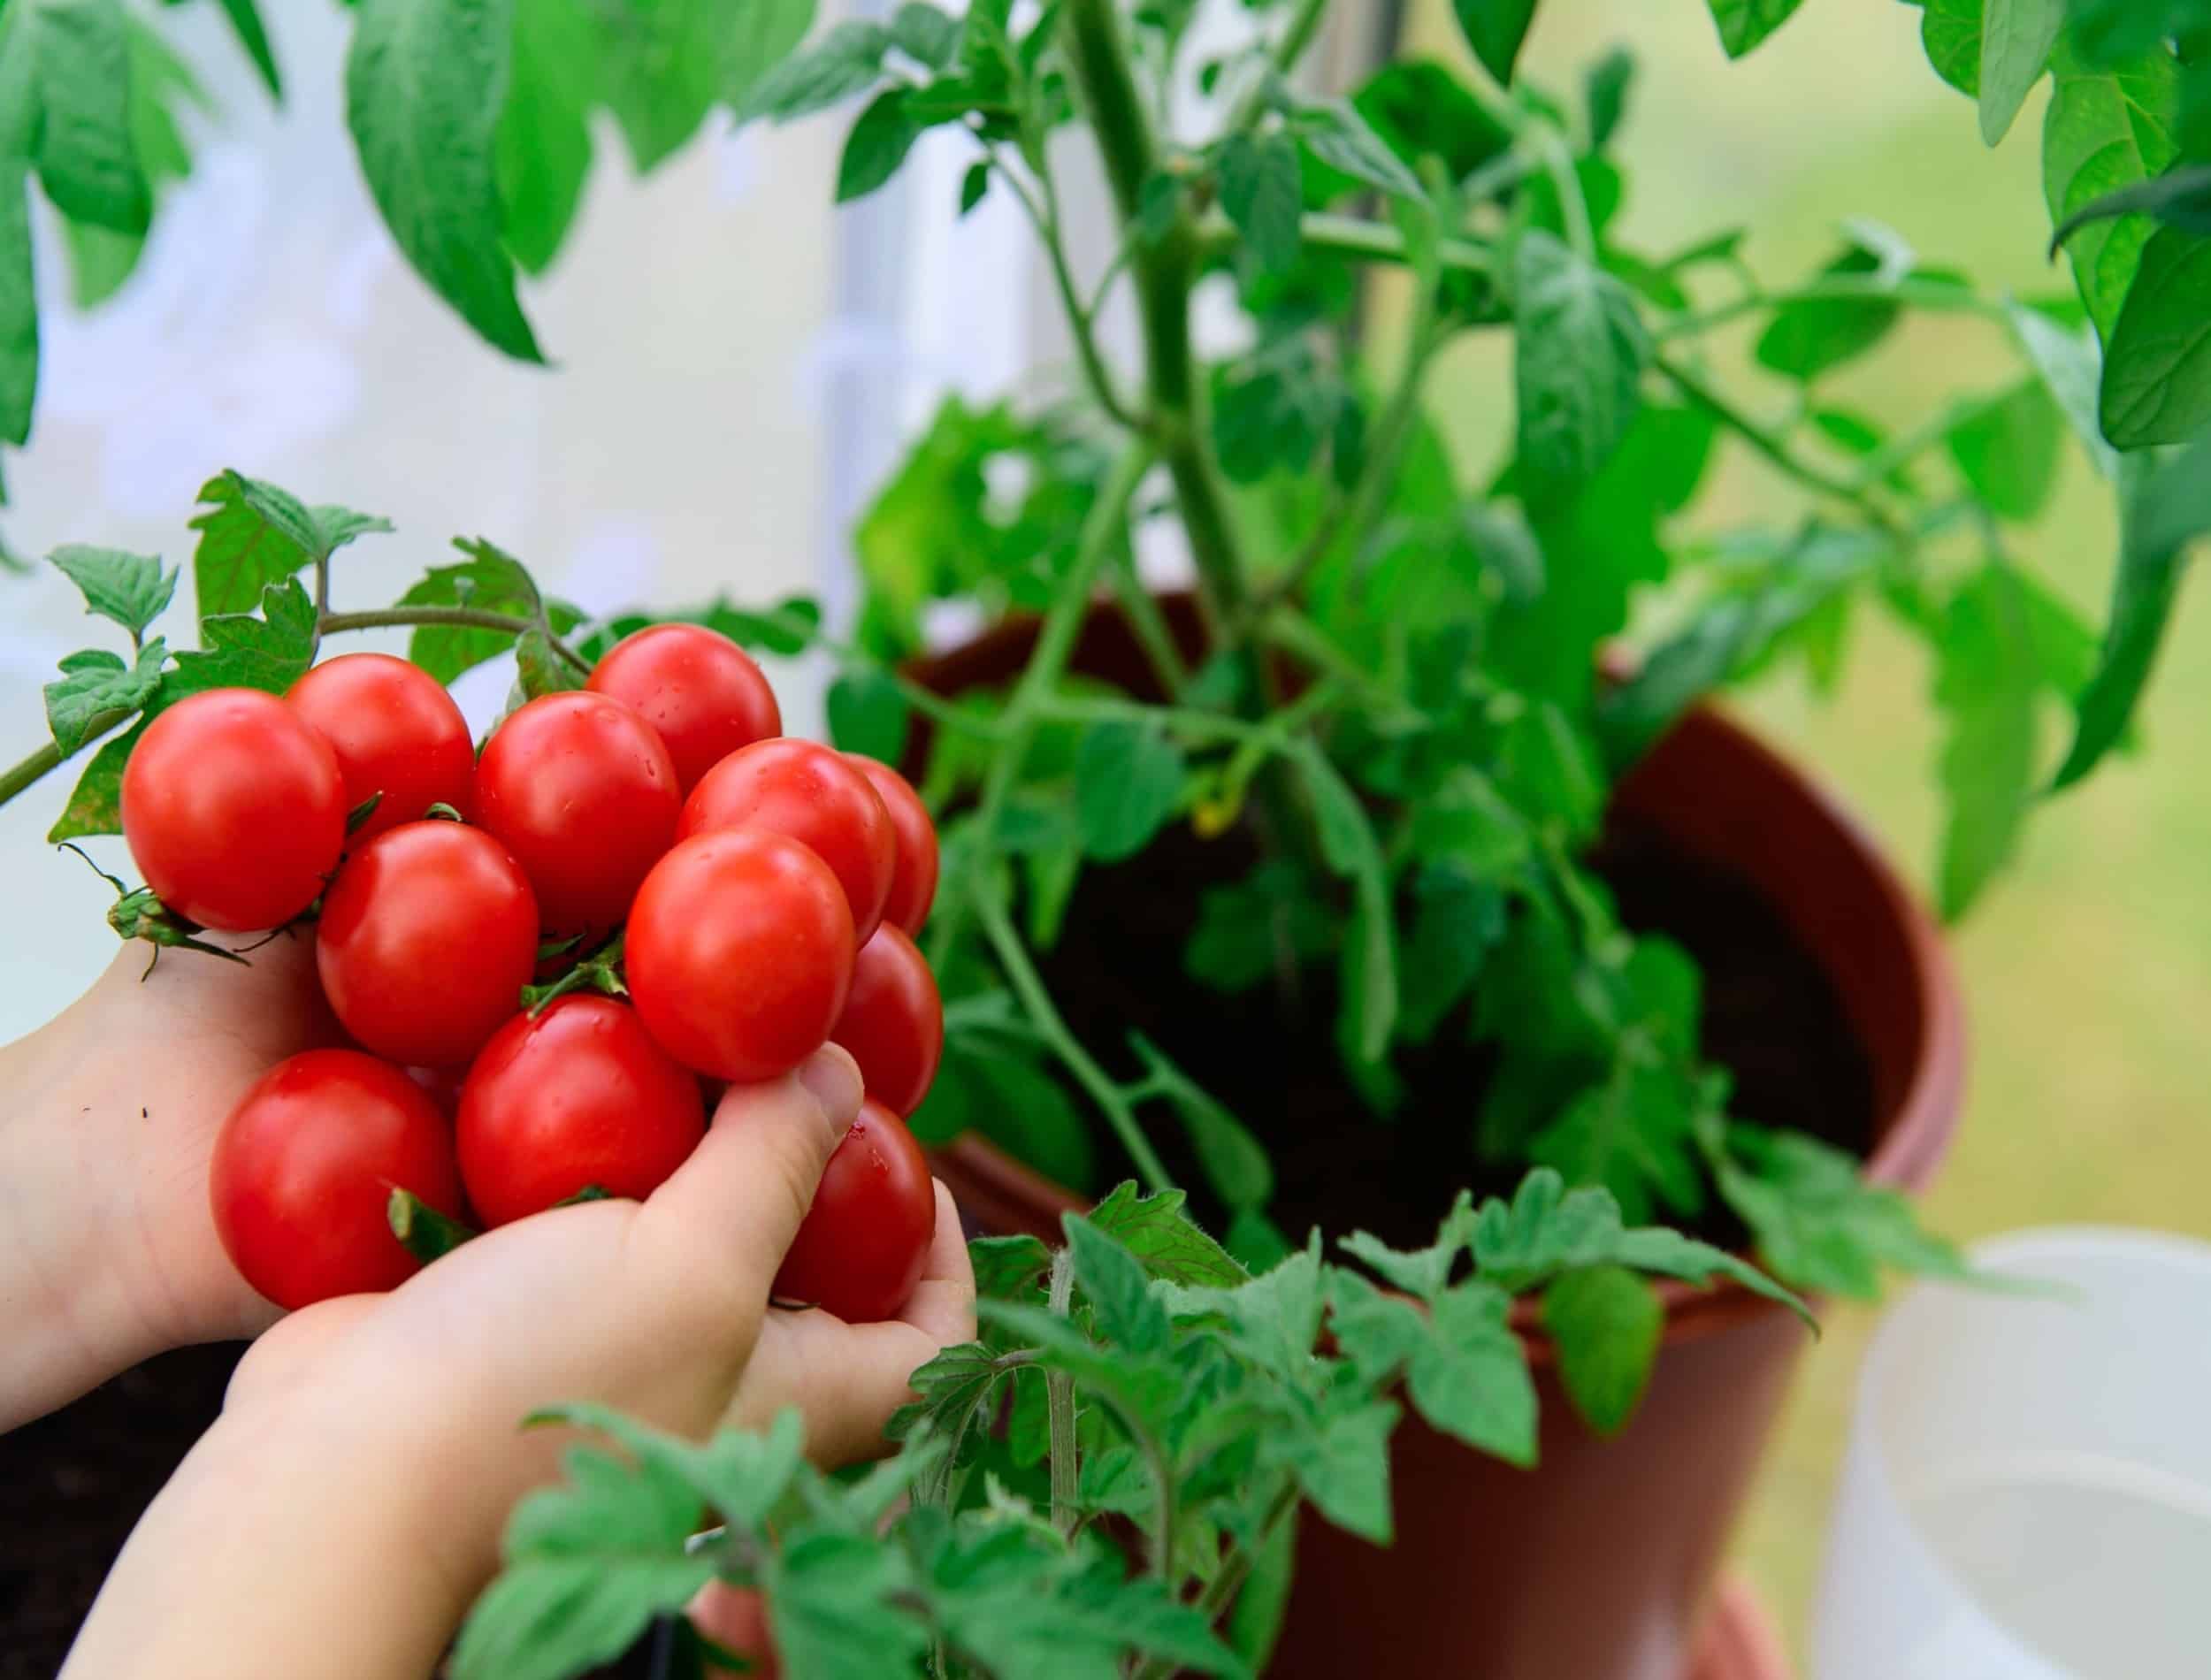 Hand picked homegrown organic cherry tomatoes, tomatoes in pots, grow bag, grow your own vegetables in a pot at home, greenhouse